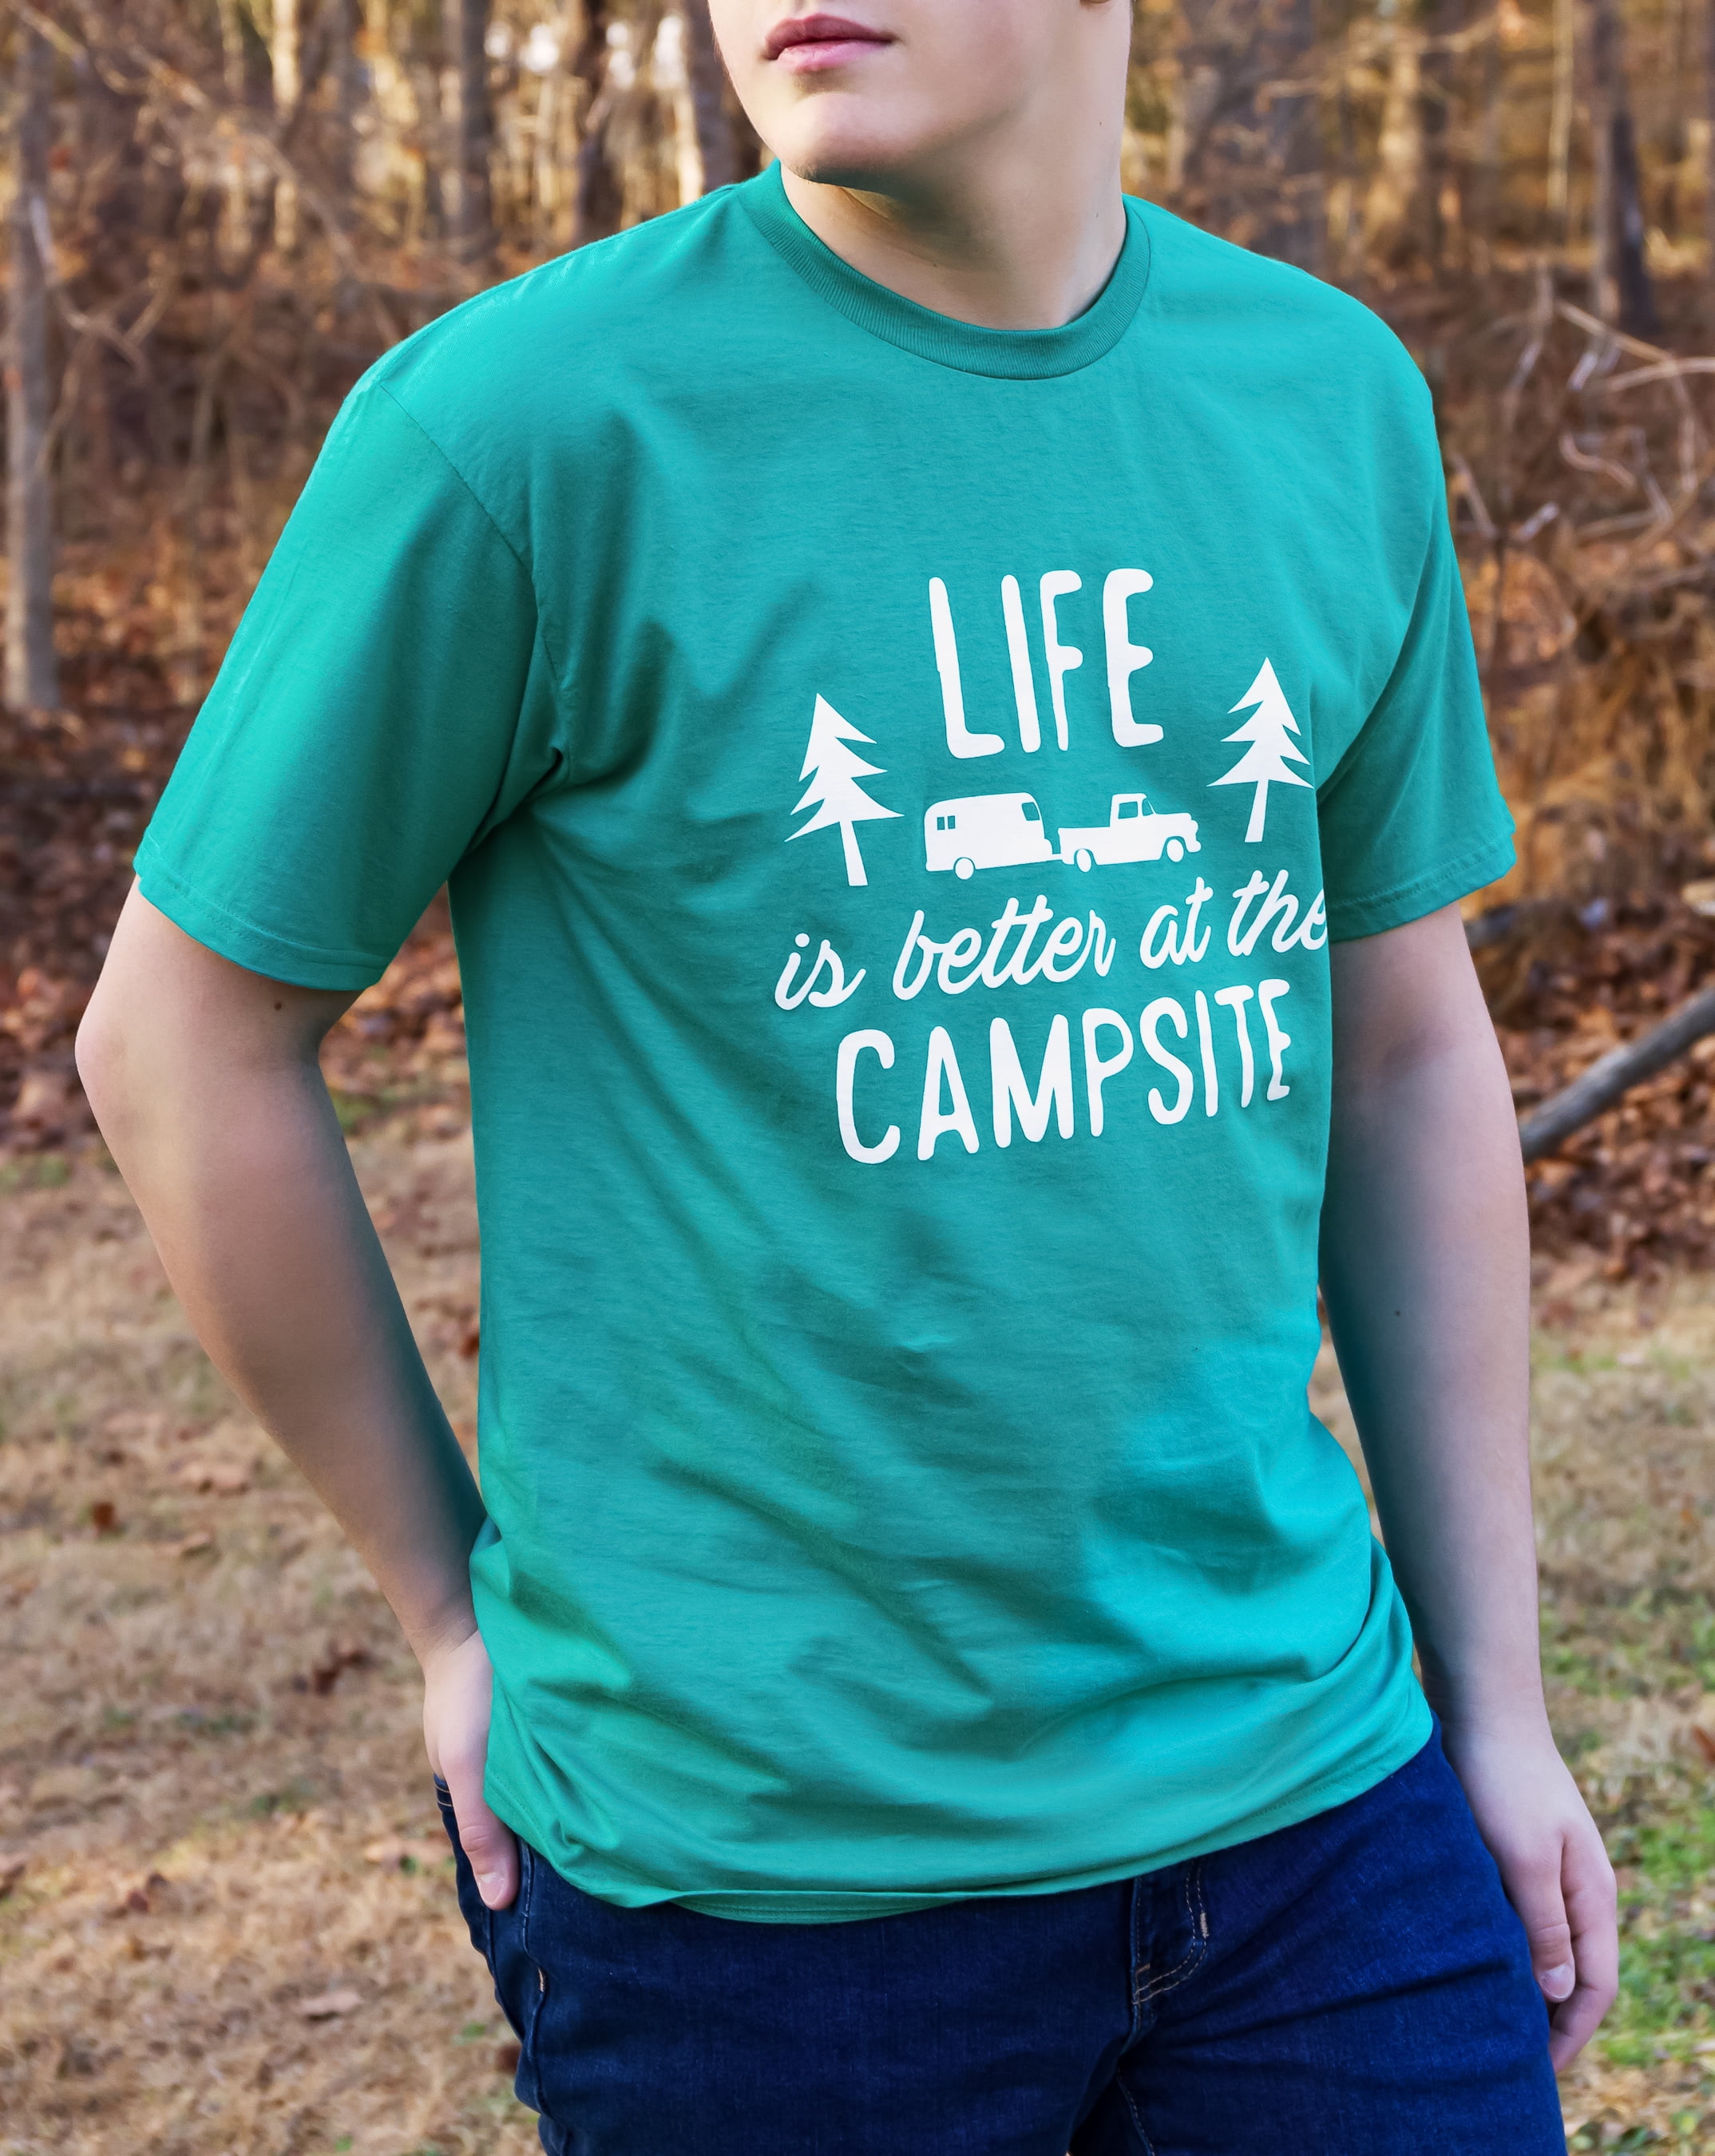 53400 Camco Red Life is Better T-Shirt-Provides Softer Comfort and a Non-Restrictive Fit-Features Raised at The Campsite Printed Graphic Size Youth X-Small 